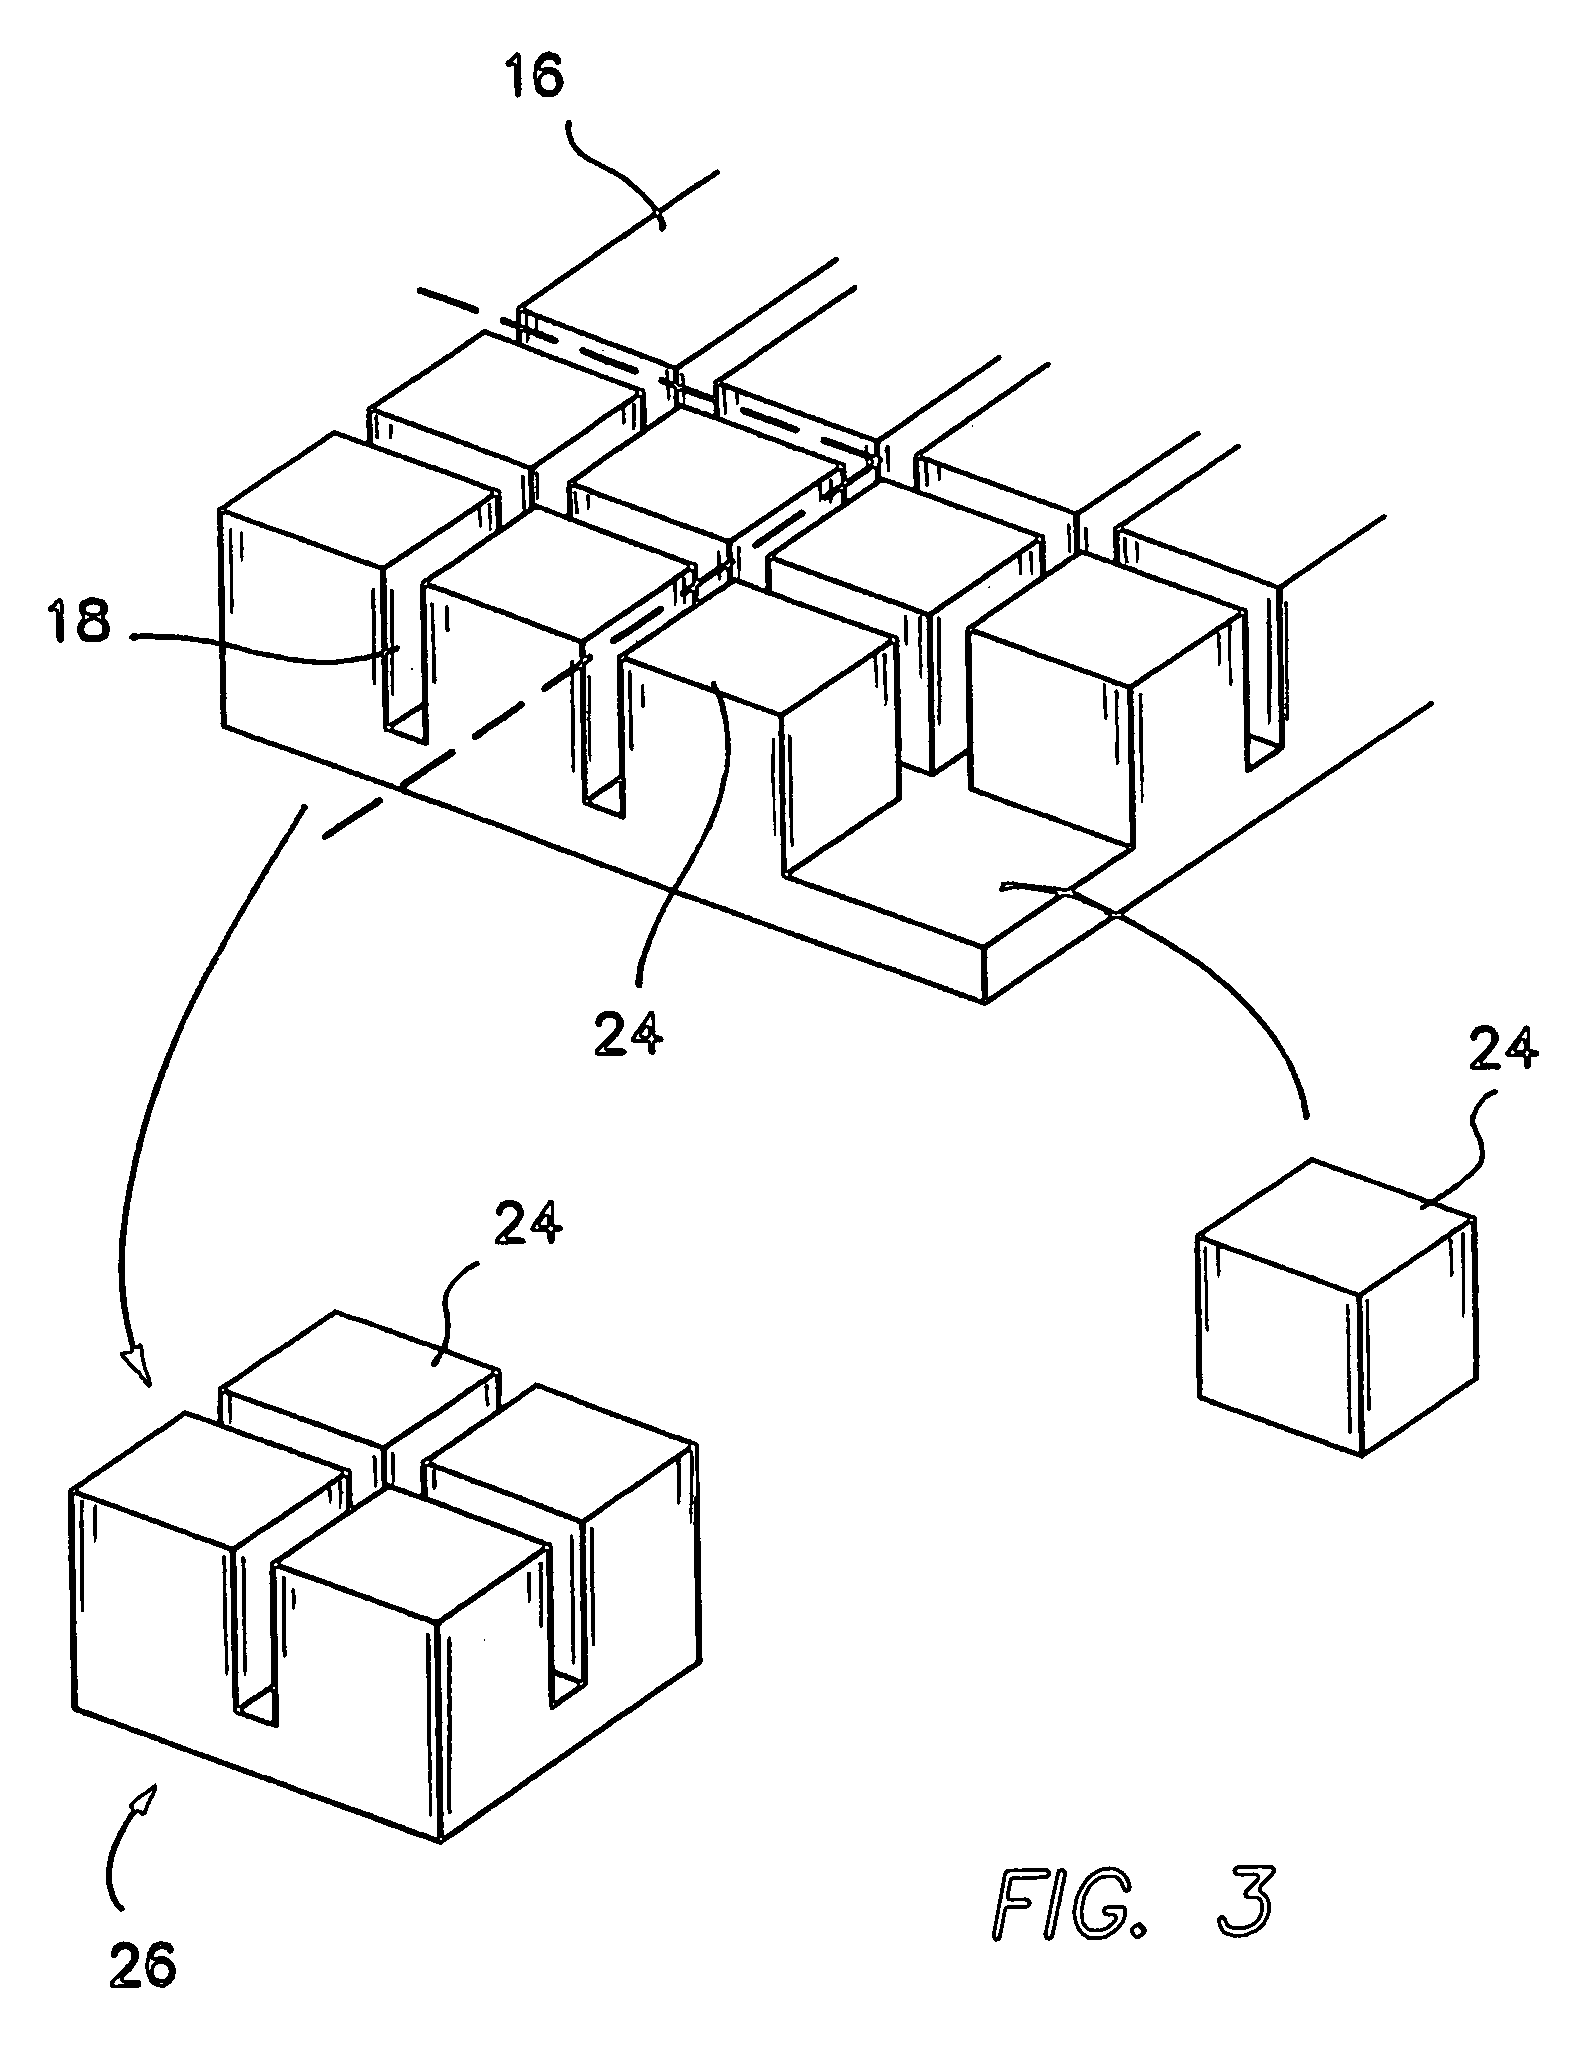 Method of sample preparation for atom probes and source of specimens